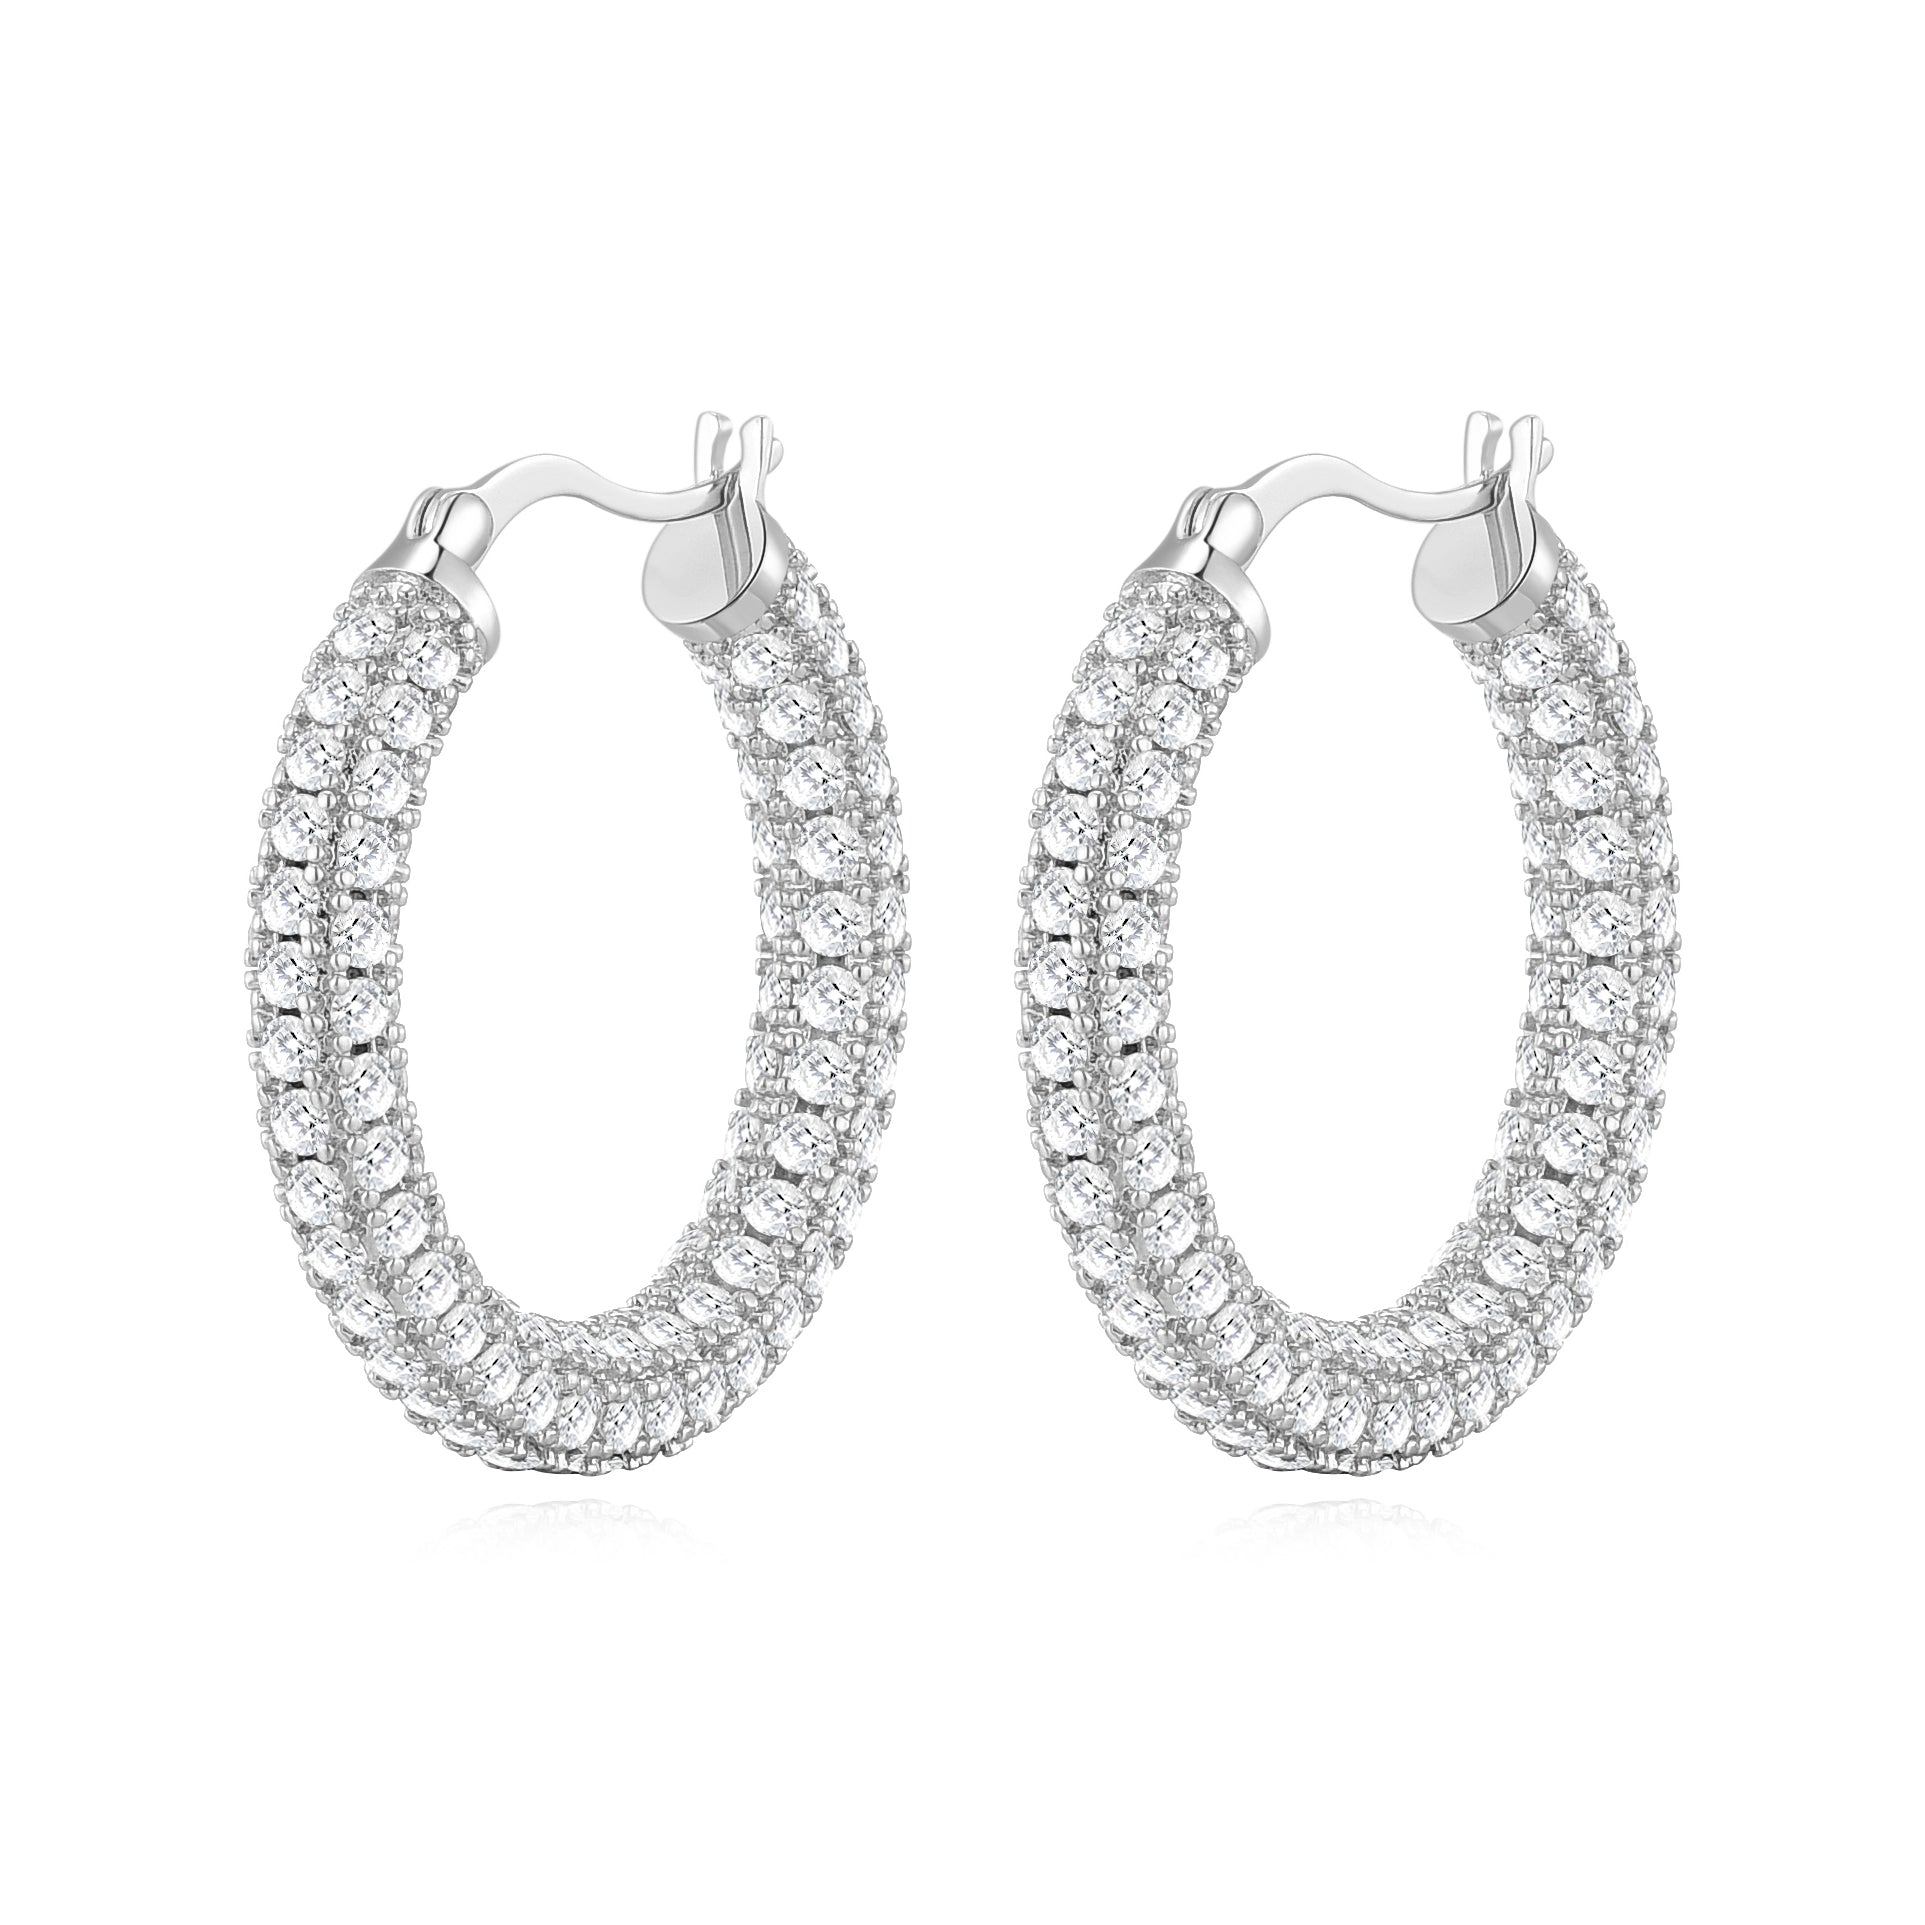 Silver Plated 30mm Pave Hoop Earrings Created with Zircondia® Crystals by Philip Jones Jewellery